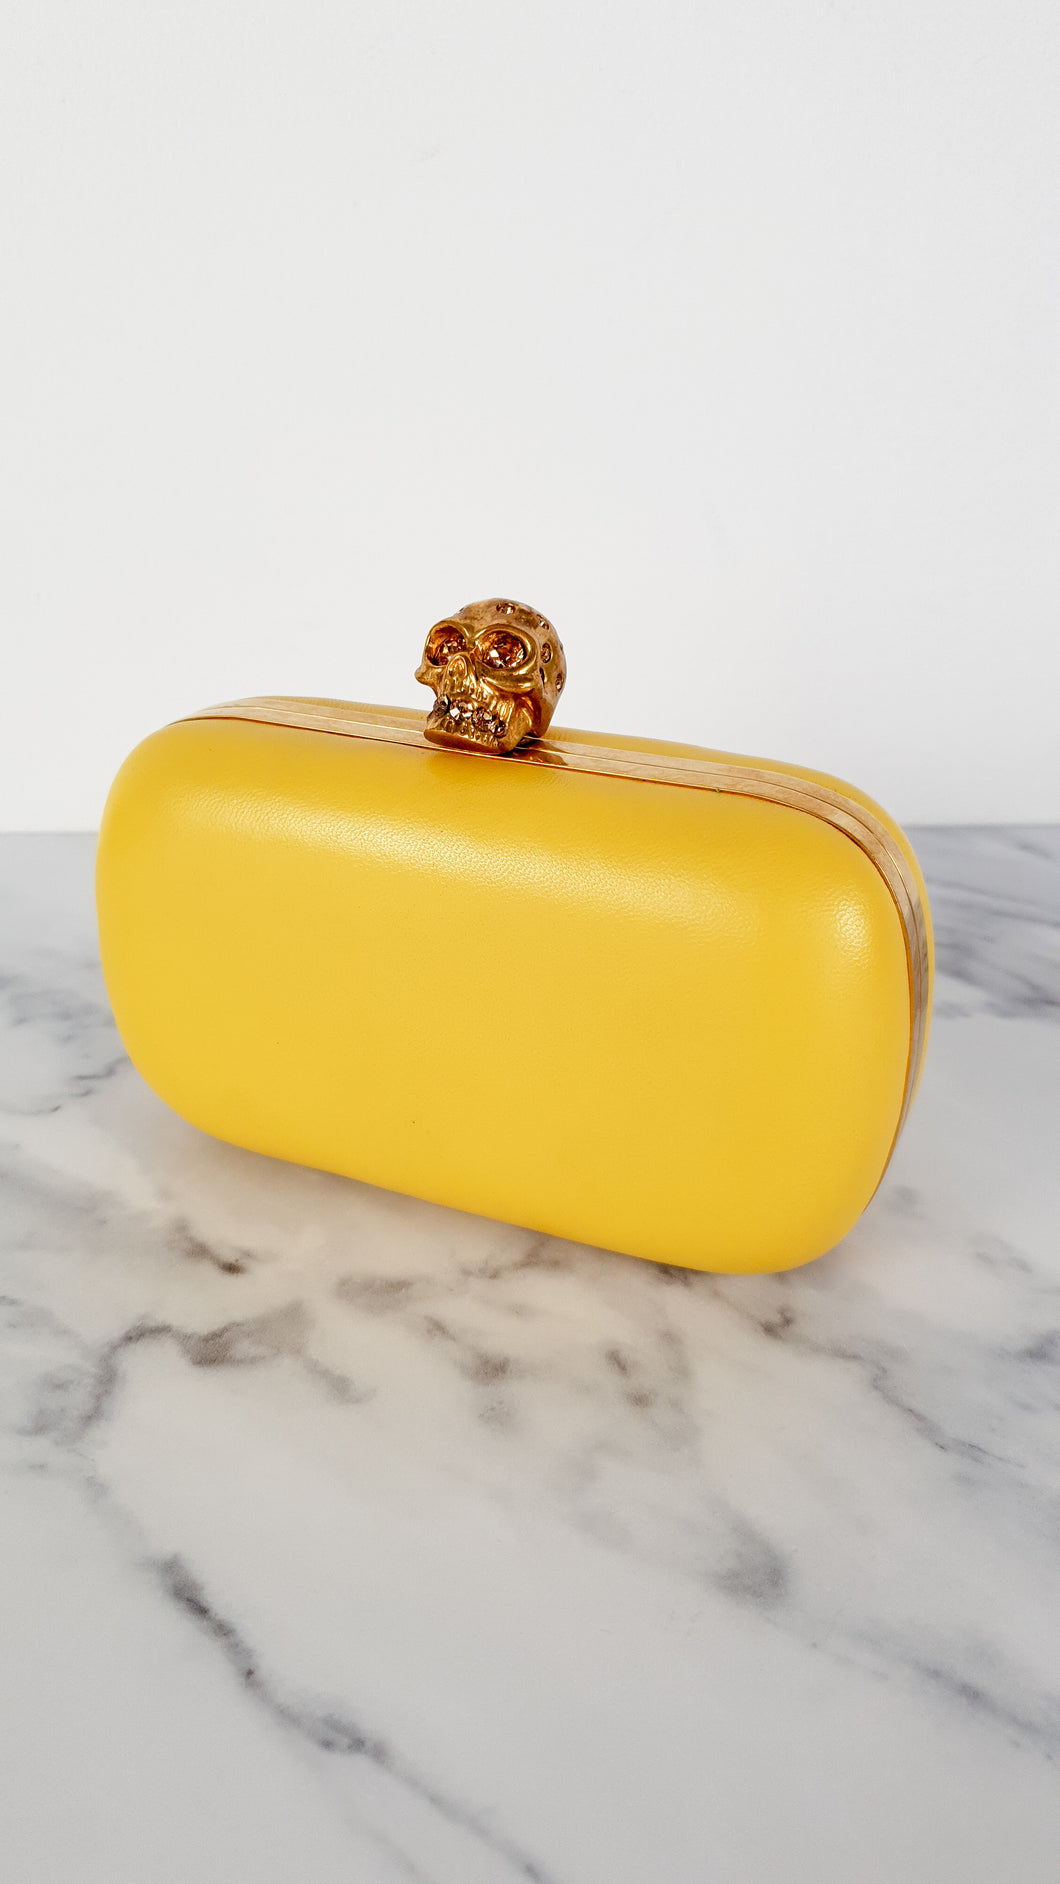 Alexander McQueen Skull Box Clutch in Yellow smooth Nappa leather & Swarovski Crystals - Style 236715 000926